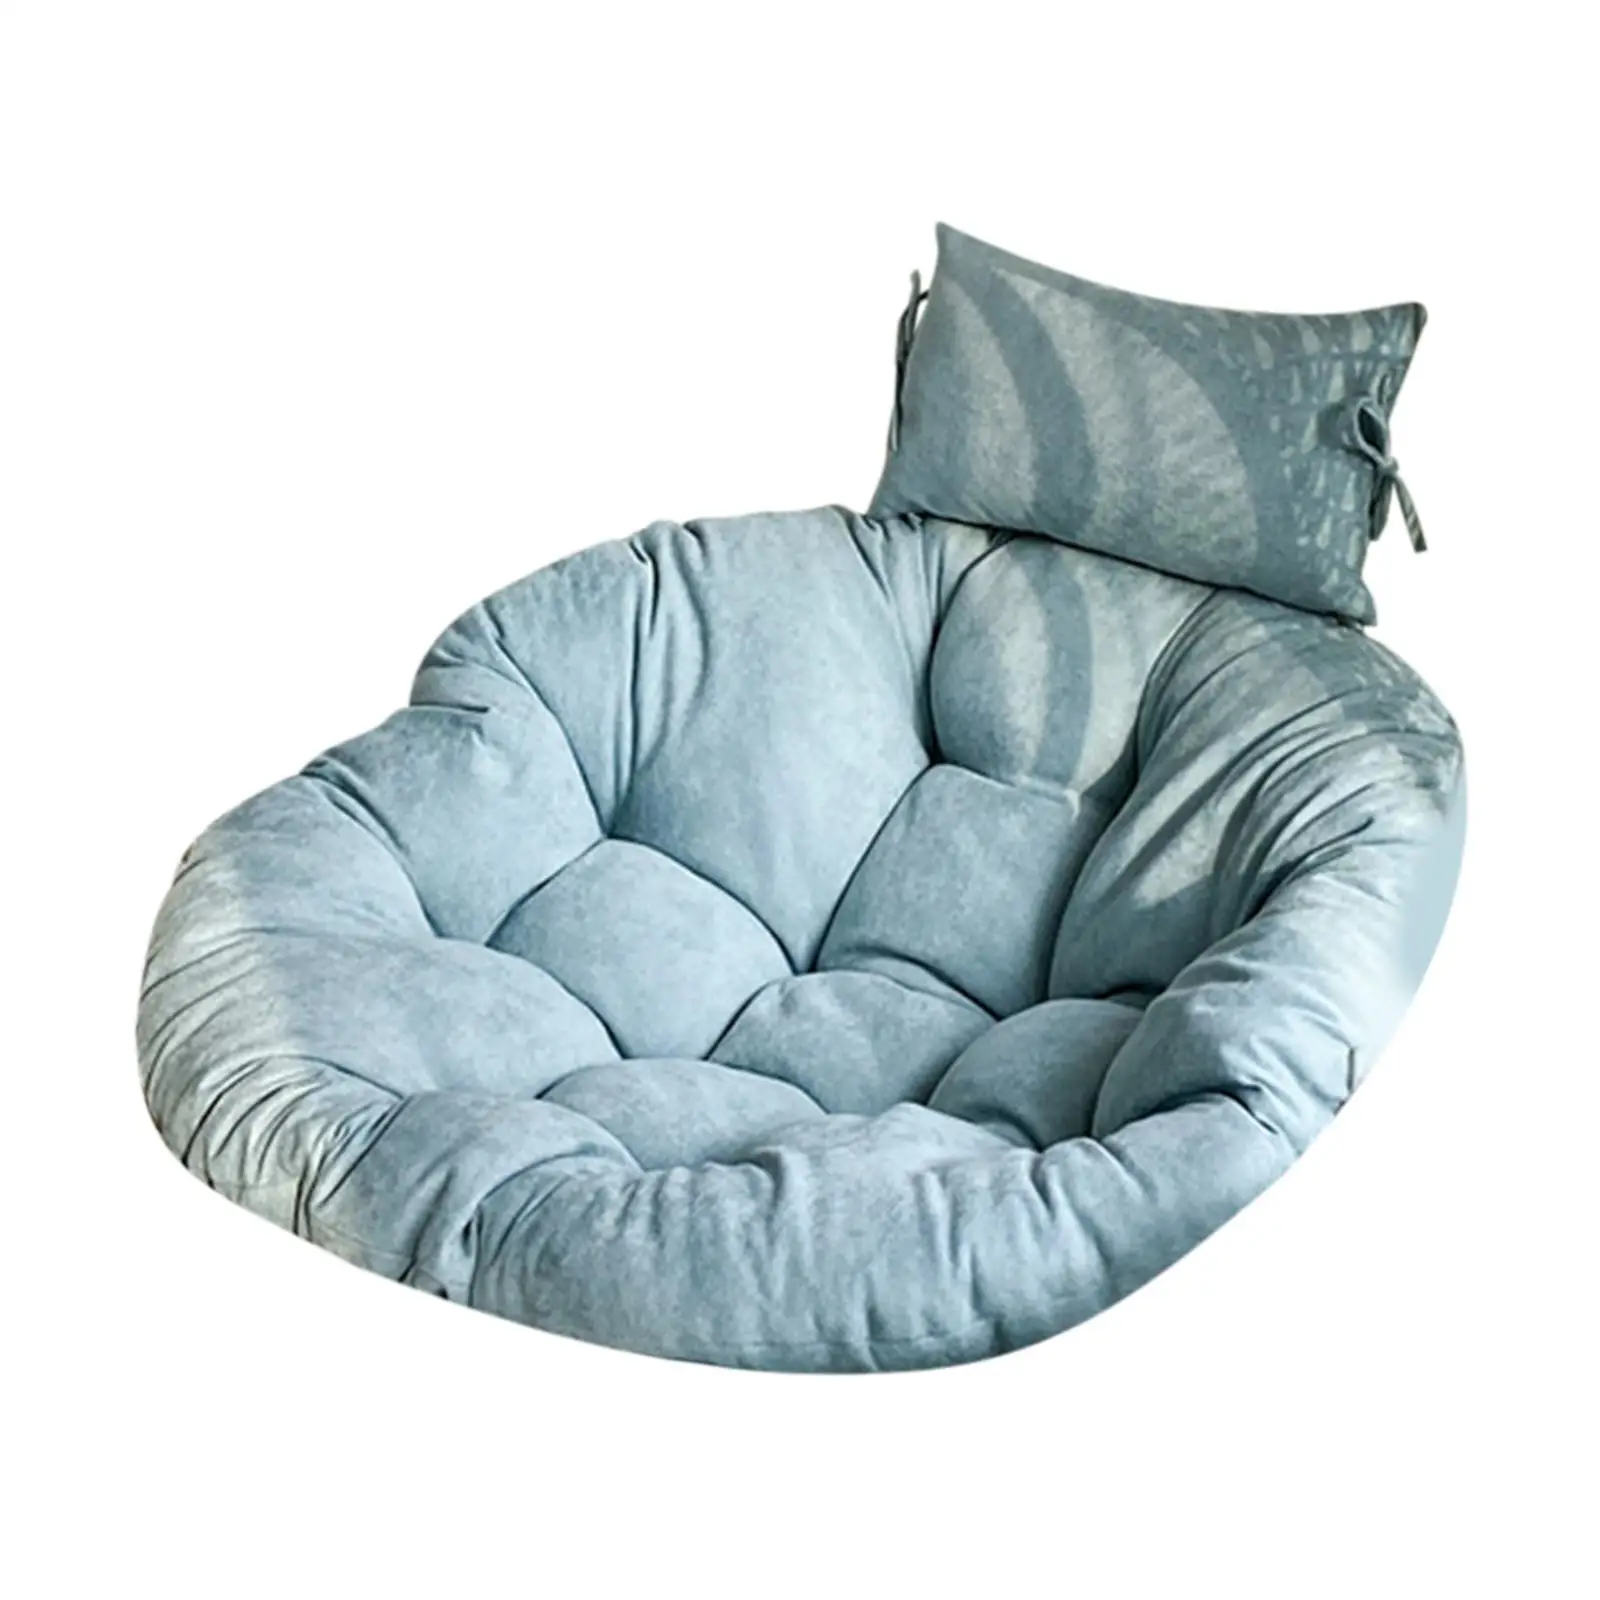 Thick Egg Chair Cushion with Headrest Diameter 105cm for Indoor and Outdoor